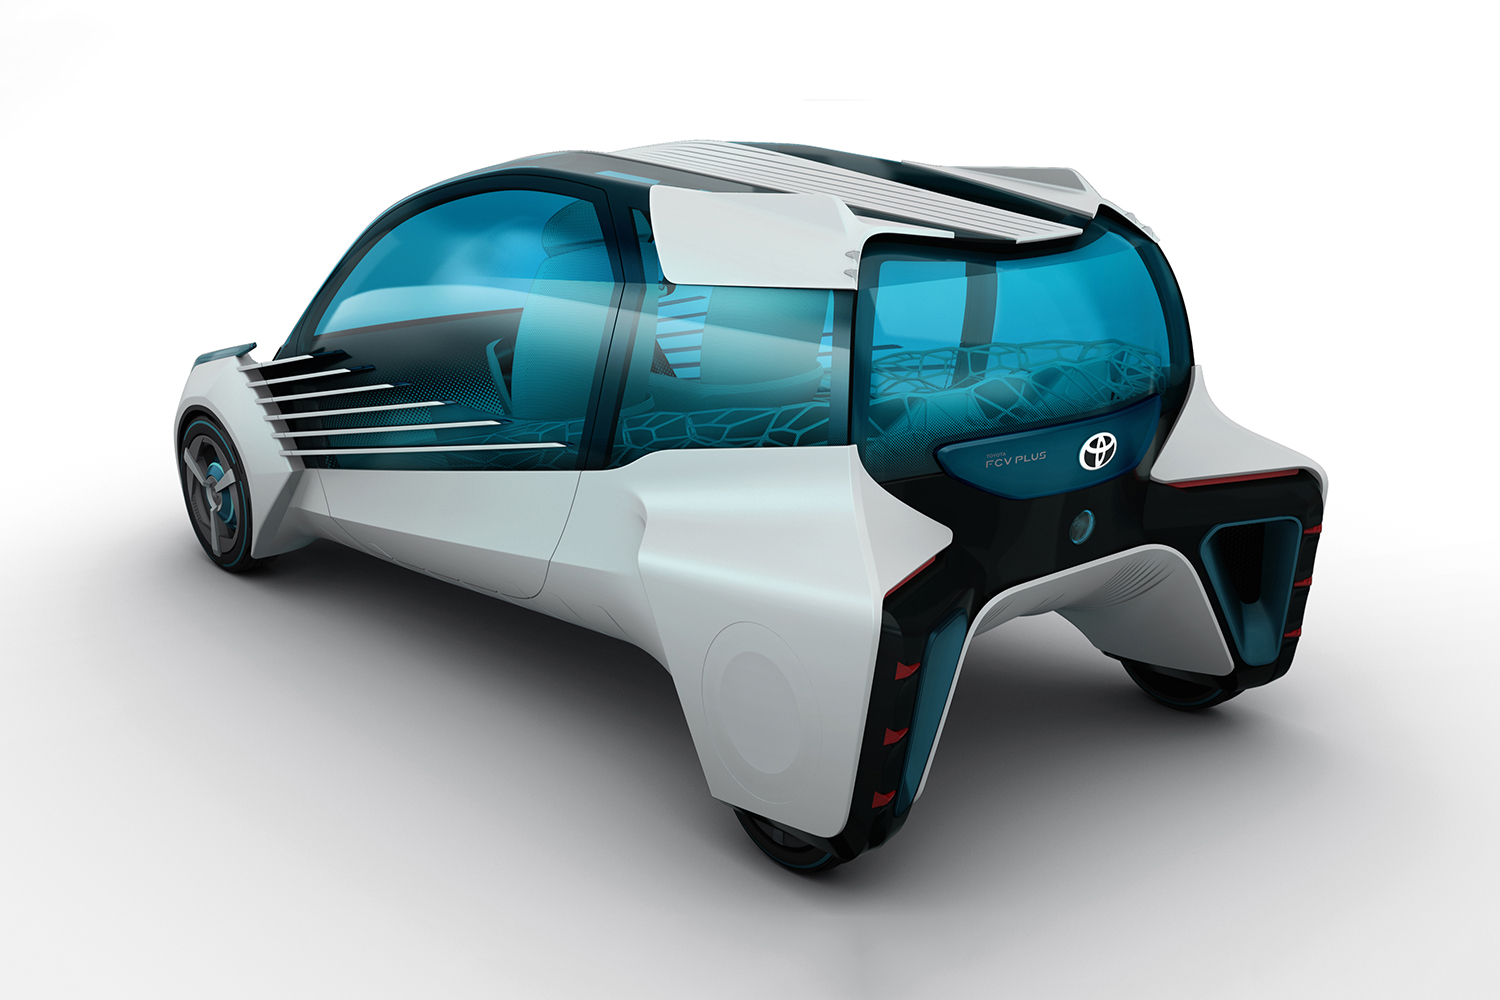 toyotas fcv plus concept comes to visit from a hydrogen future 2015 tokyo toyota 006